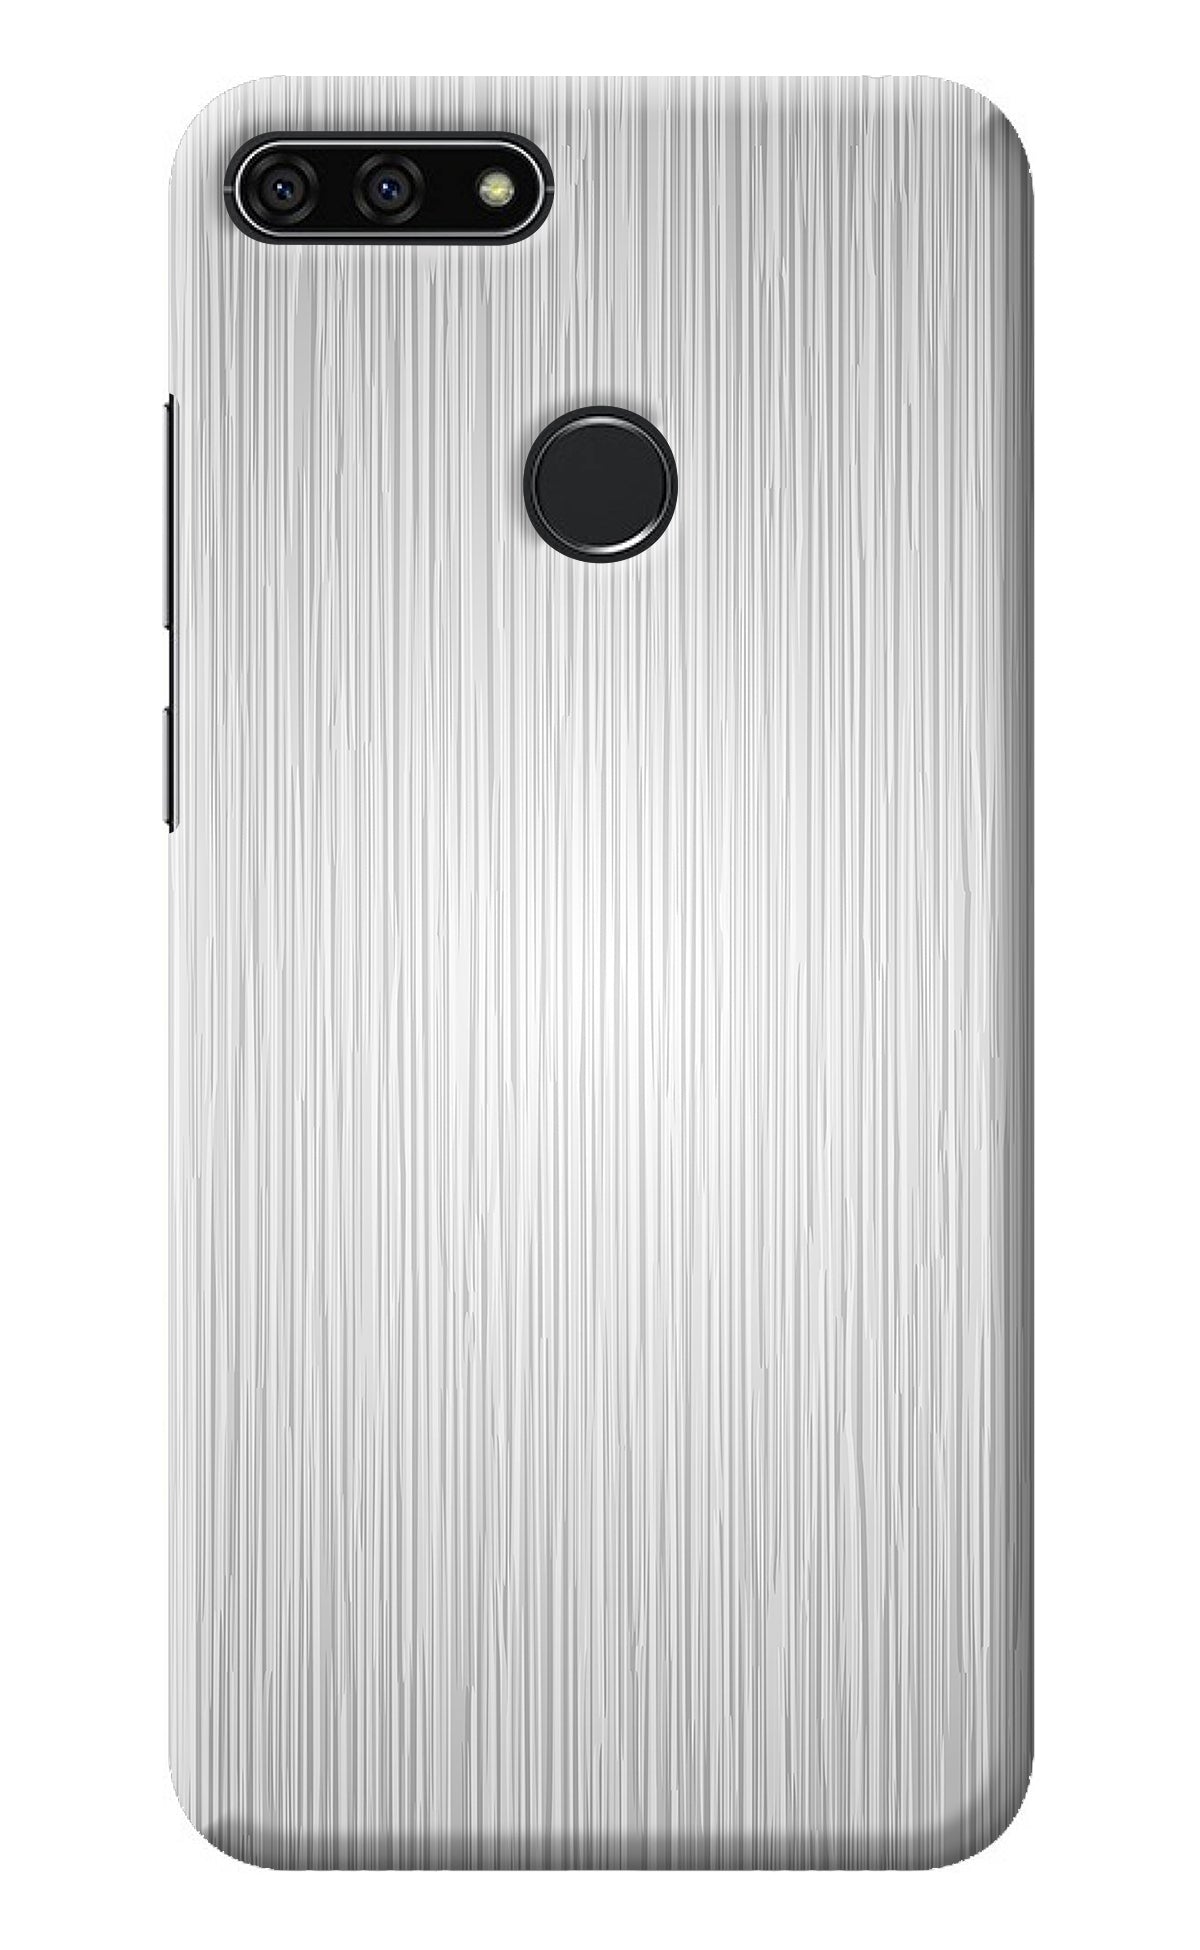 Wooden Grey Texture Honor 7A Back Cover